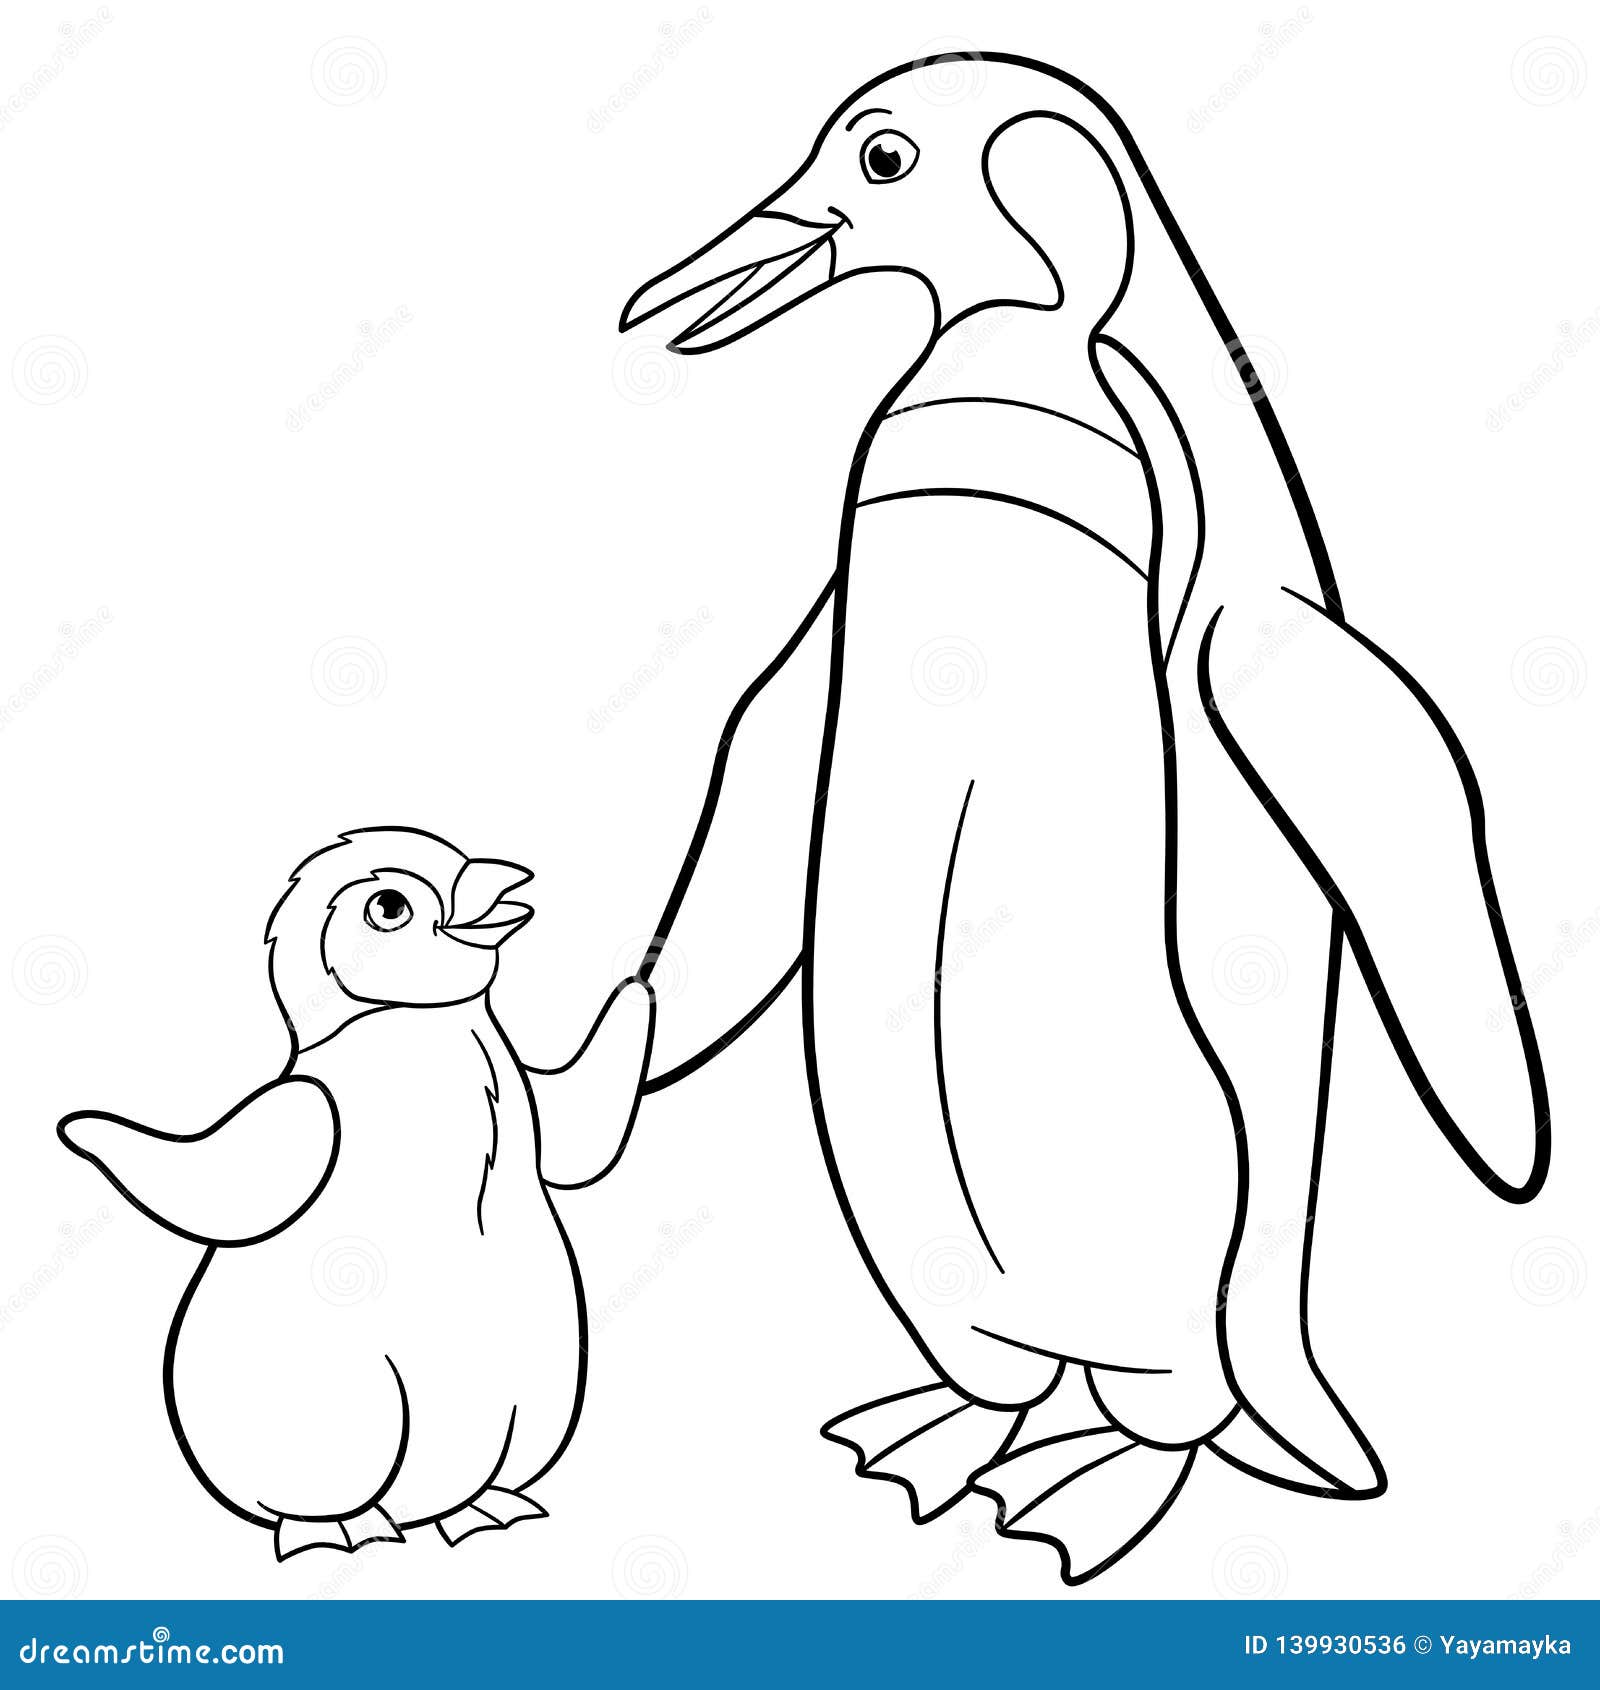 Mommy And Baby Vector Design Images, Cute Mommy And Baby Penguin